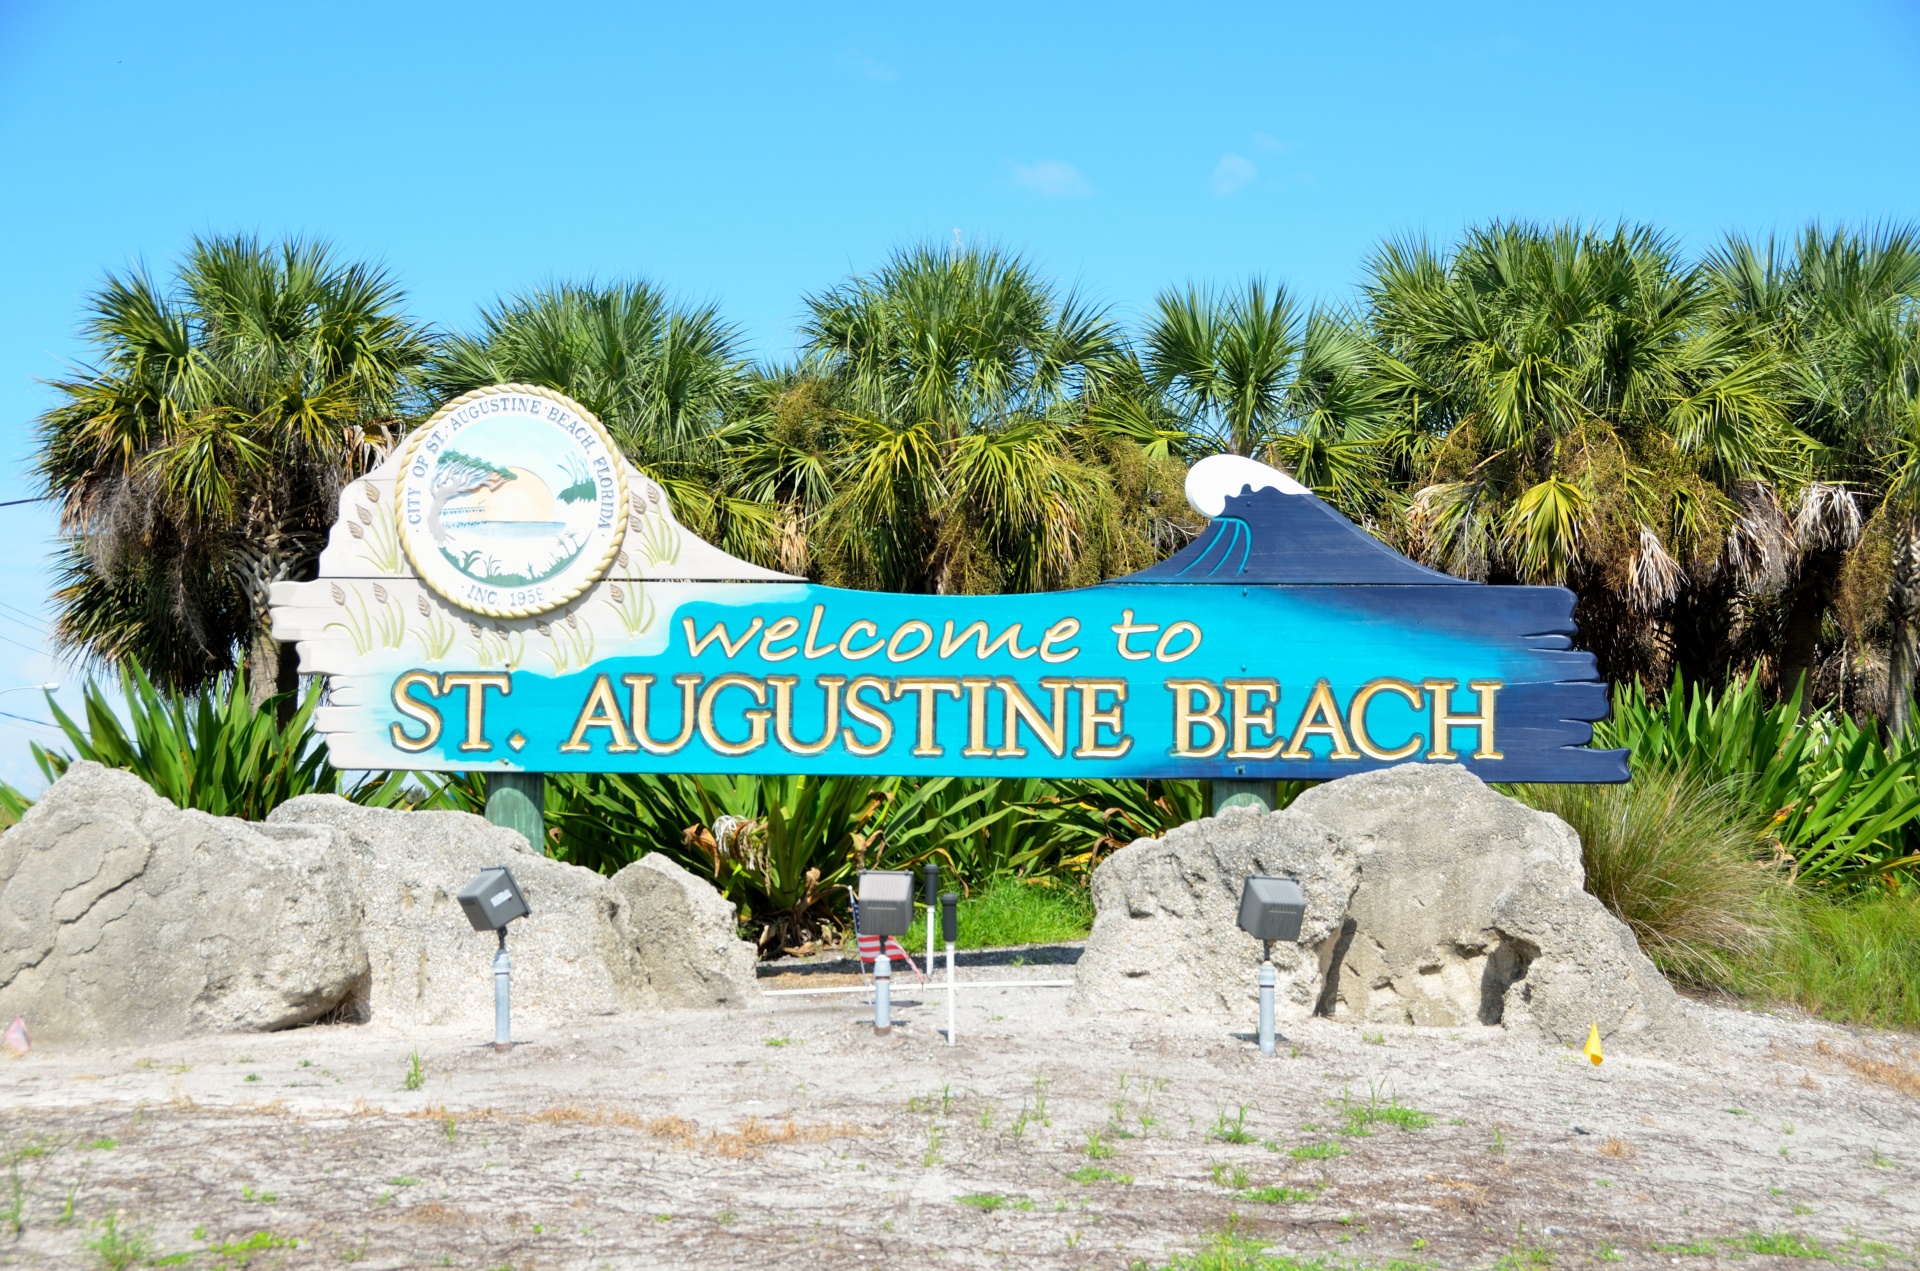 Welcome sign for St. Augustin Beach, Florida